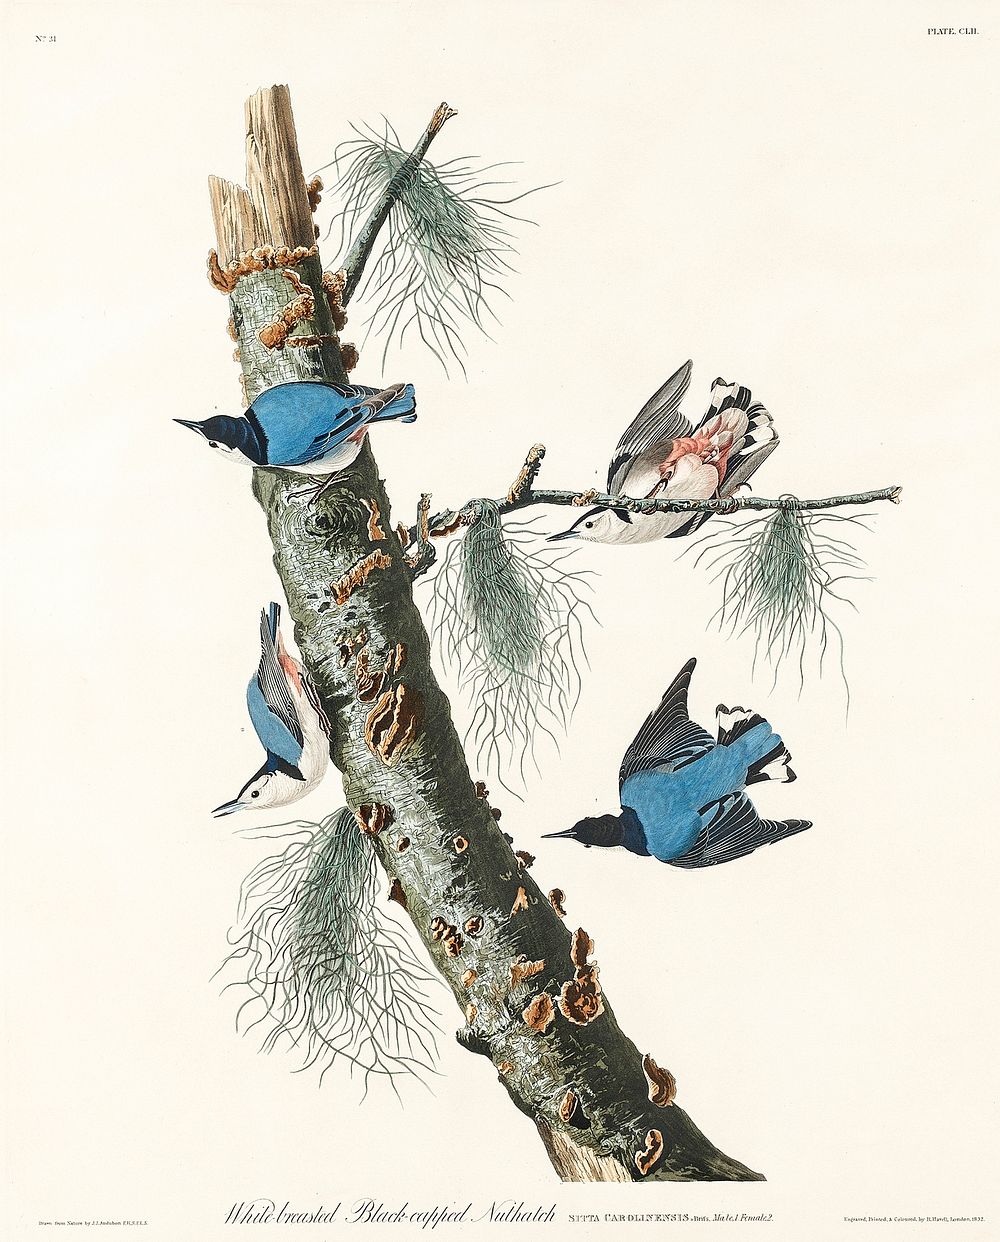 White-breasted Black-capped Nuthatch from Birds of America (1827) by John James Audubon, etched by William Home Lizars.…